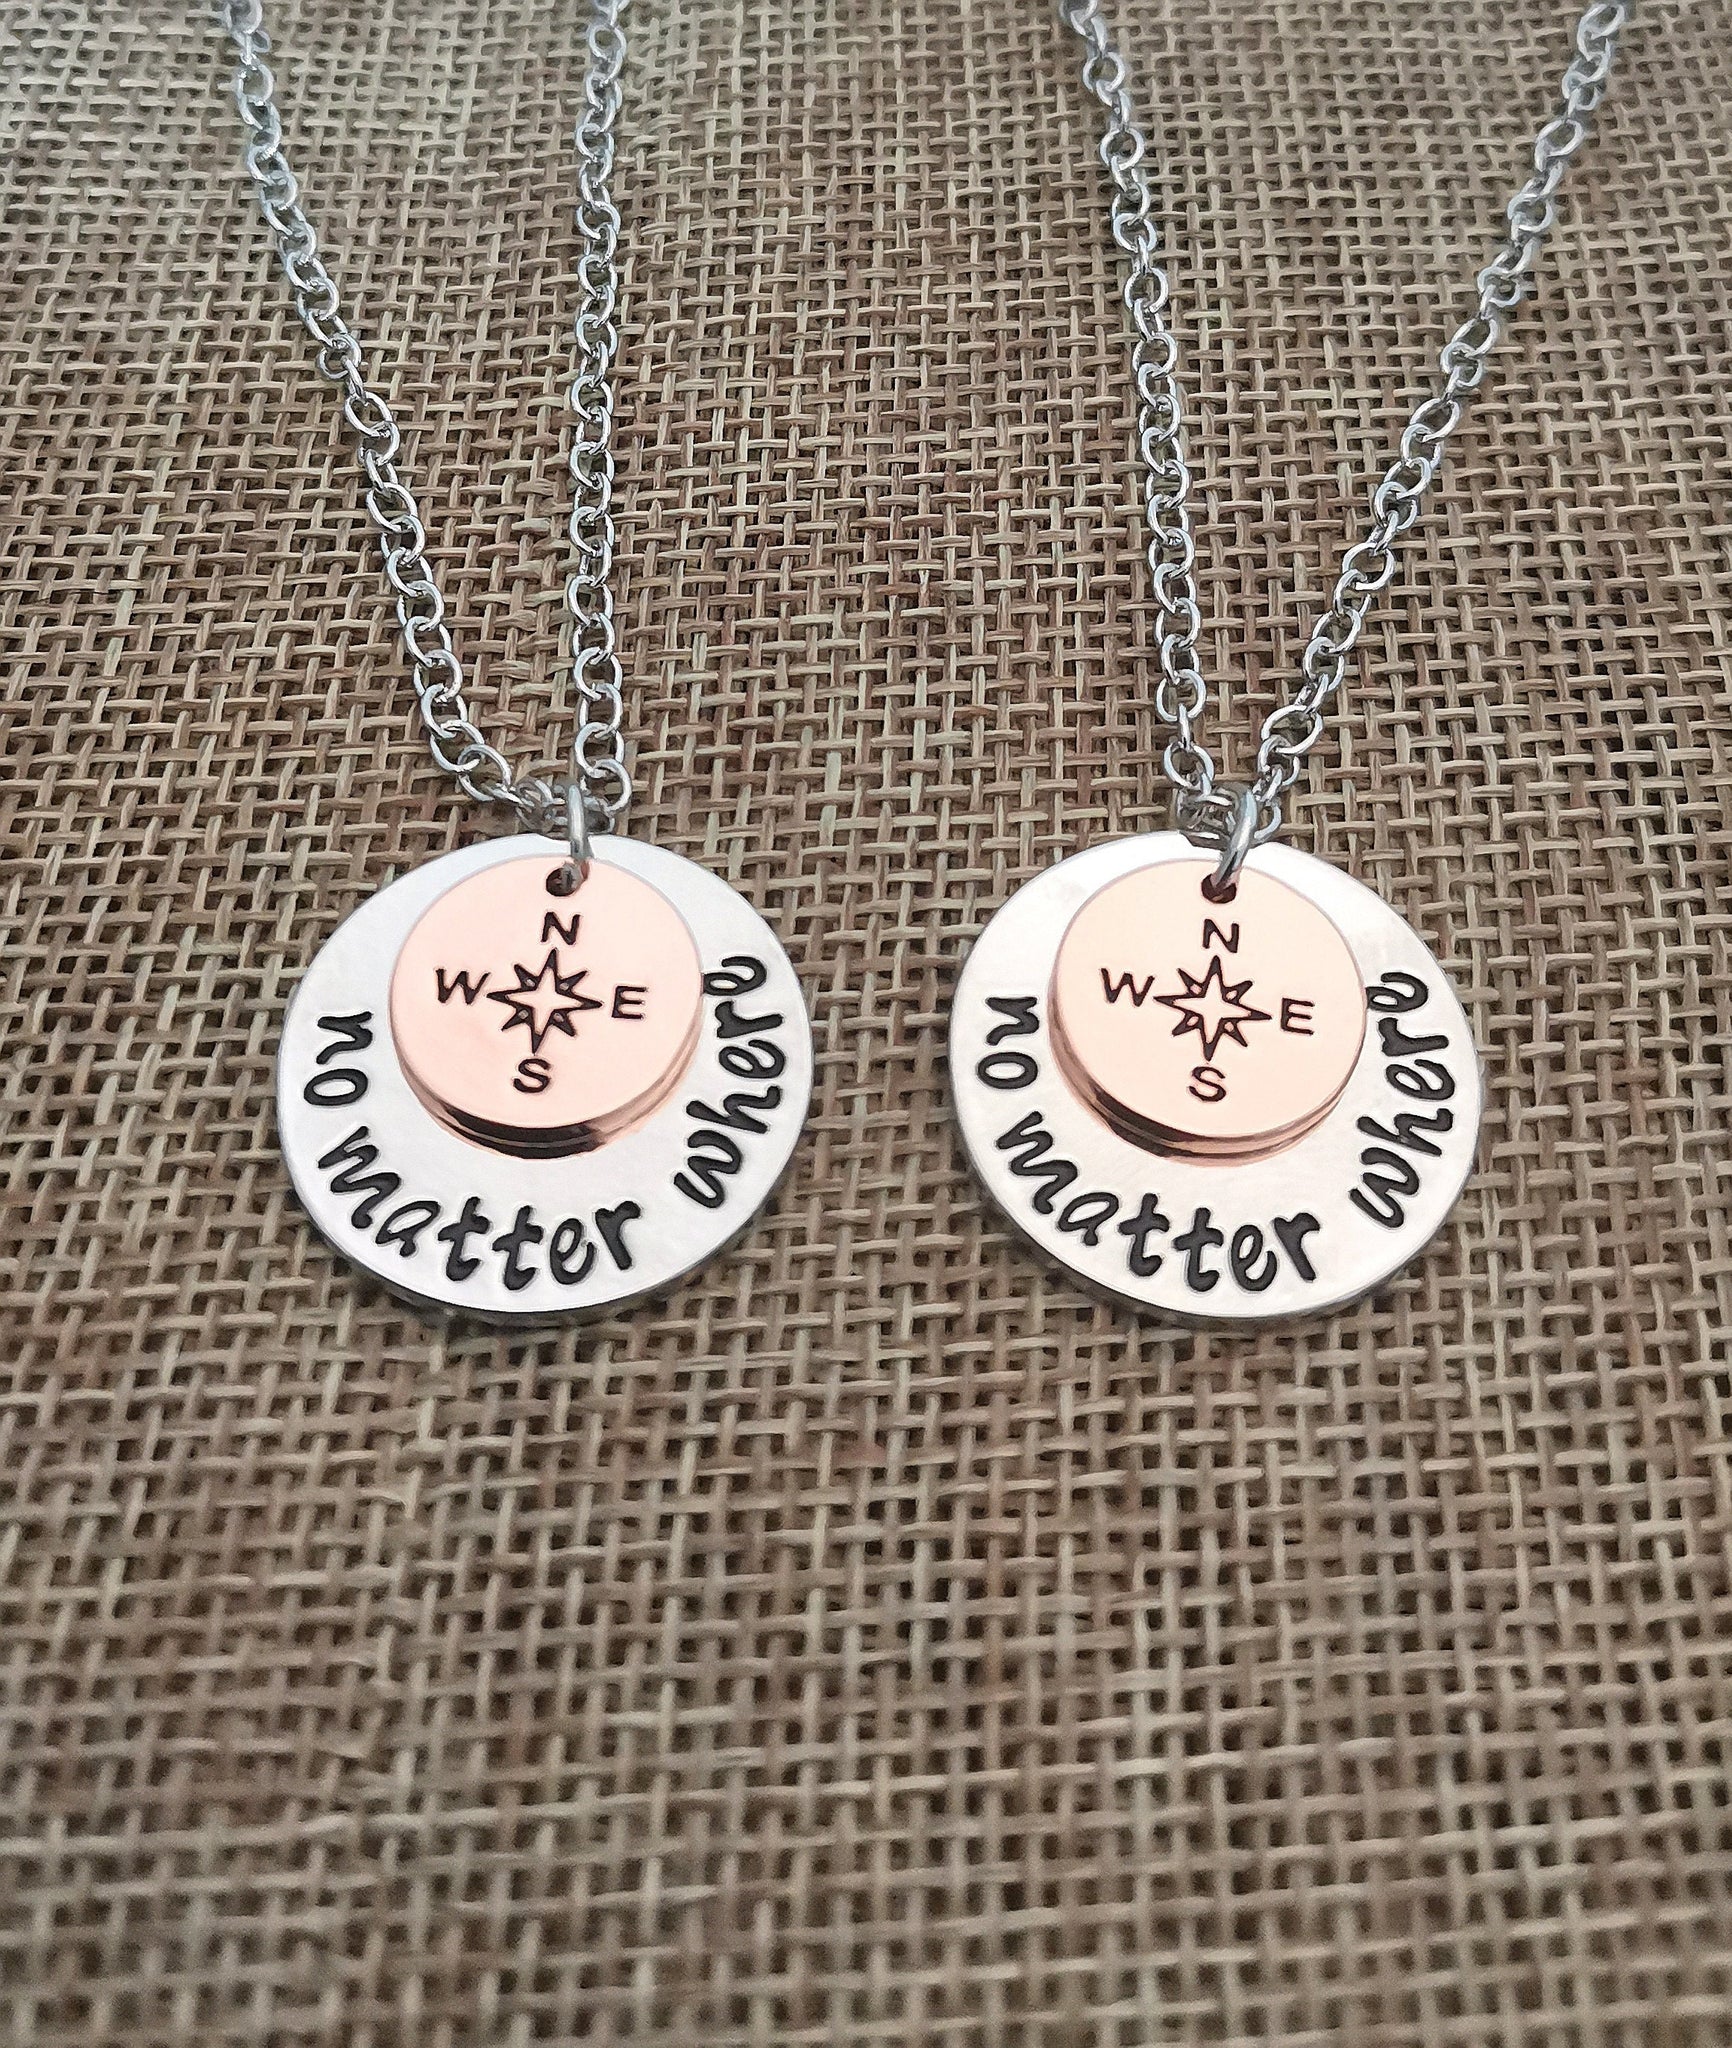 46 BEST Matching His And Hers Necklaces for Boyfriend And Girlfriends! | His  and hers necklaces, Necklace for girlfriend, Boyfriend necklace